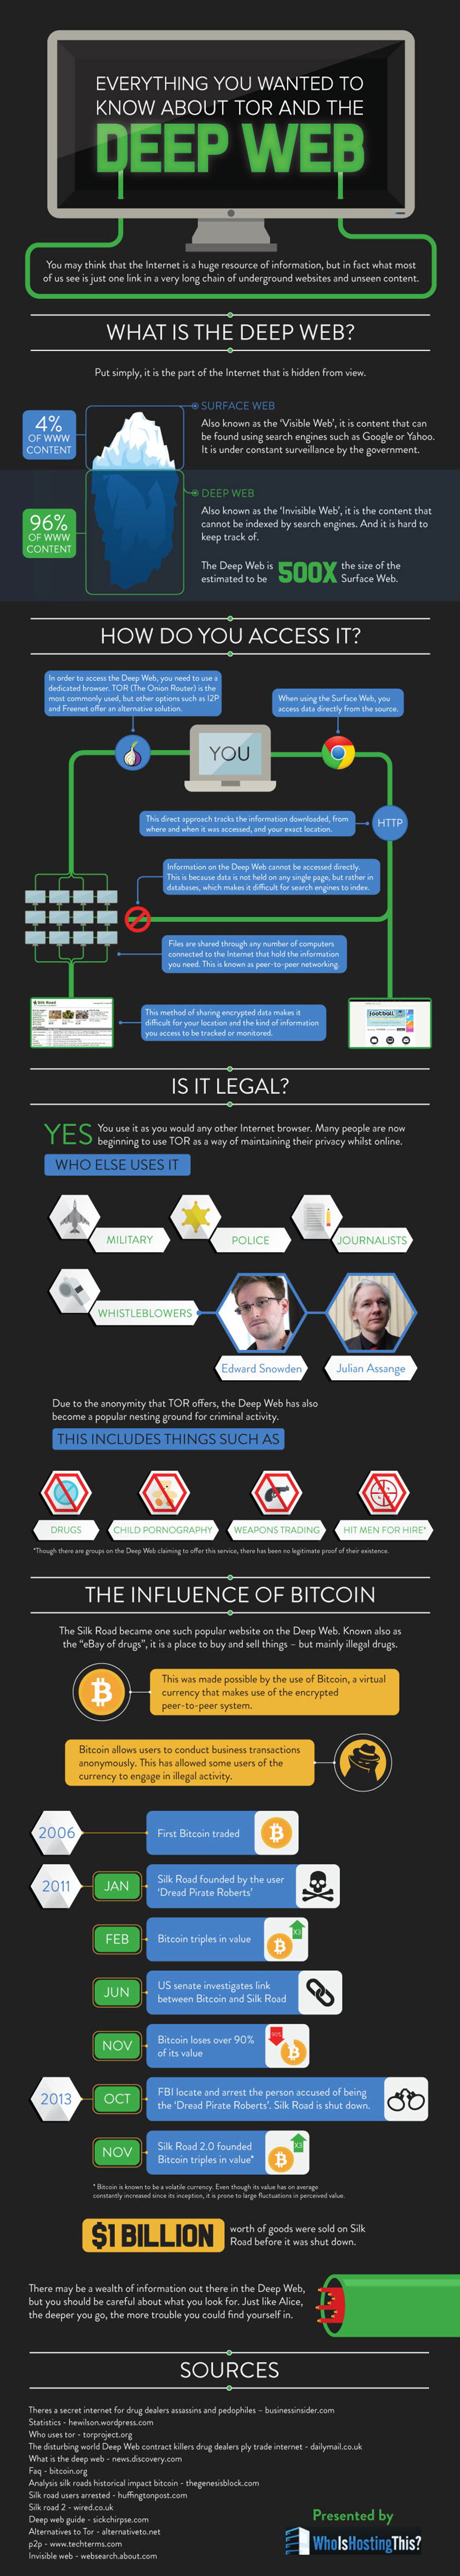 How to Access The Deep Web Safely Infographic